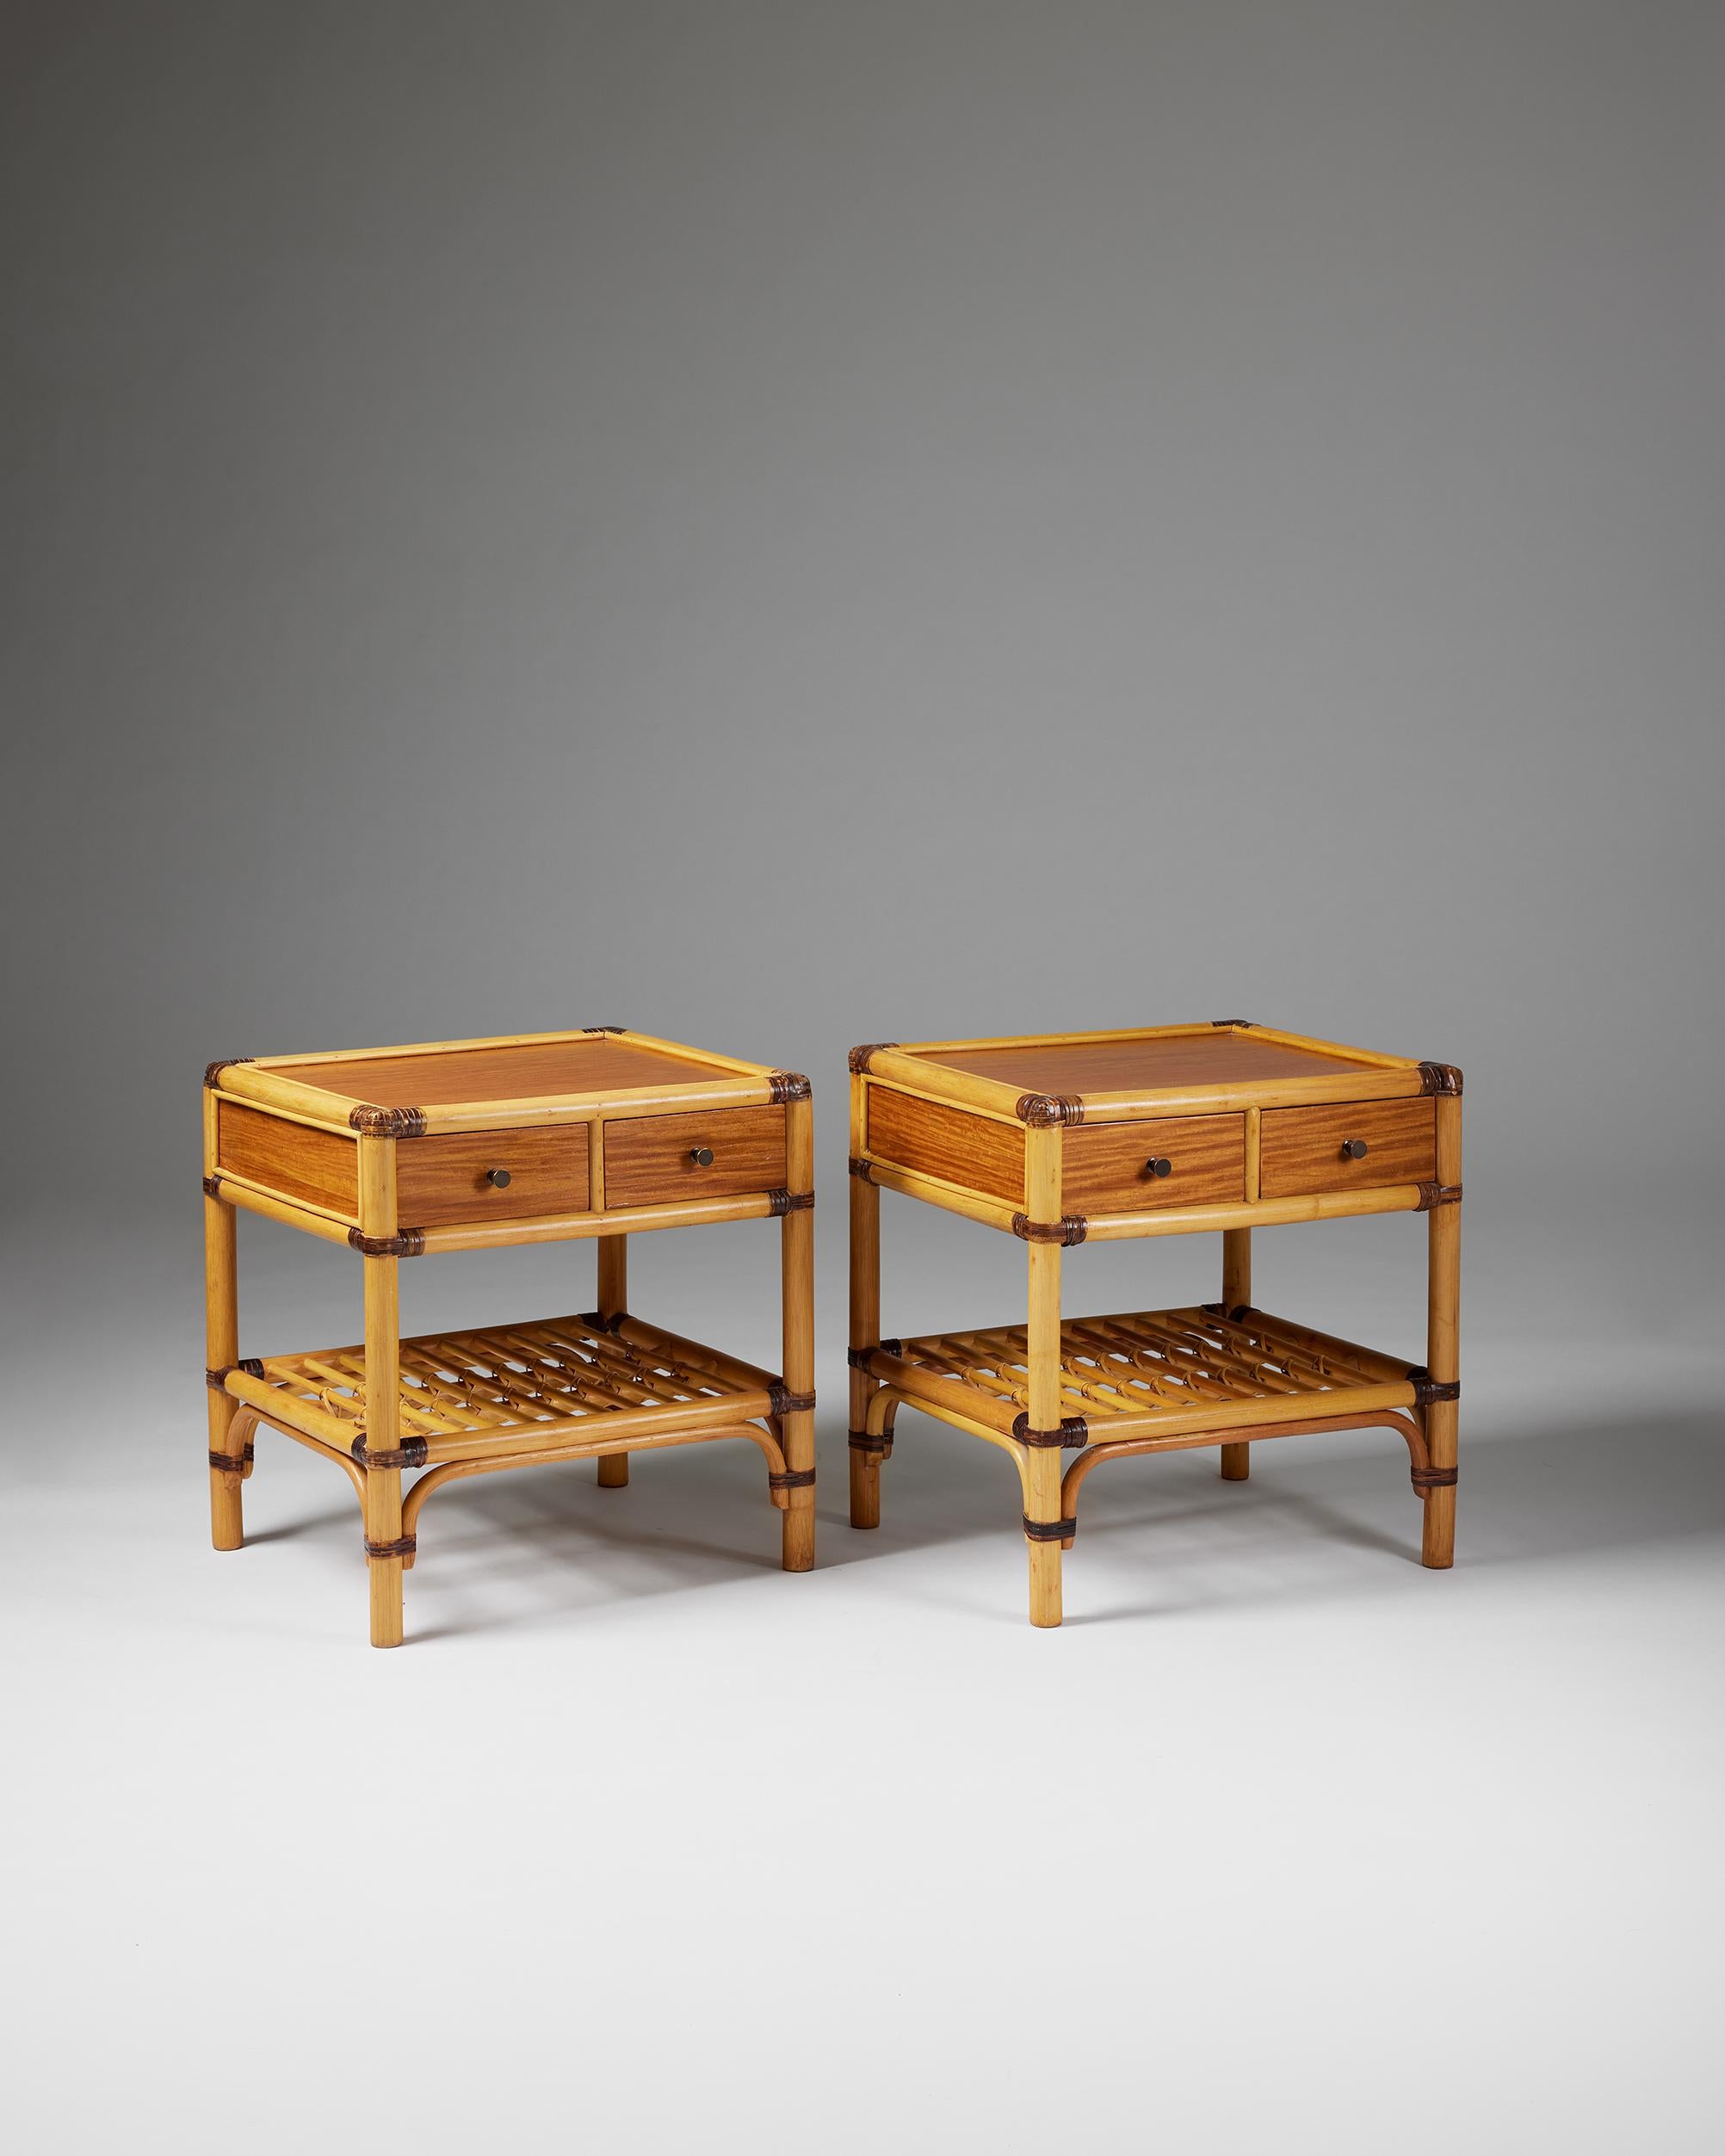 Pair of bedside tables, anonymous for DUX,
Sweden, 1960s.

Cane, rattan and teak.

The colonial-style combination of cane, rattan, and teak makes this Scandinavian bedside table design particularly interesting. The woven edges and metal handles